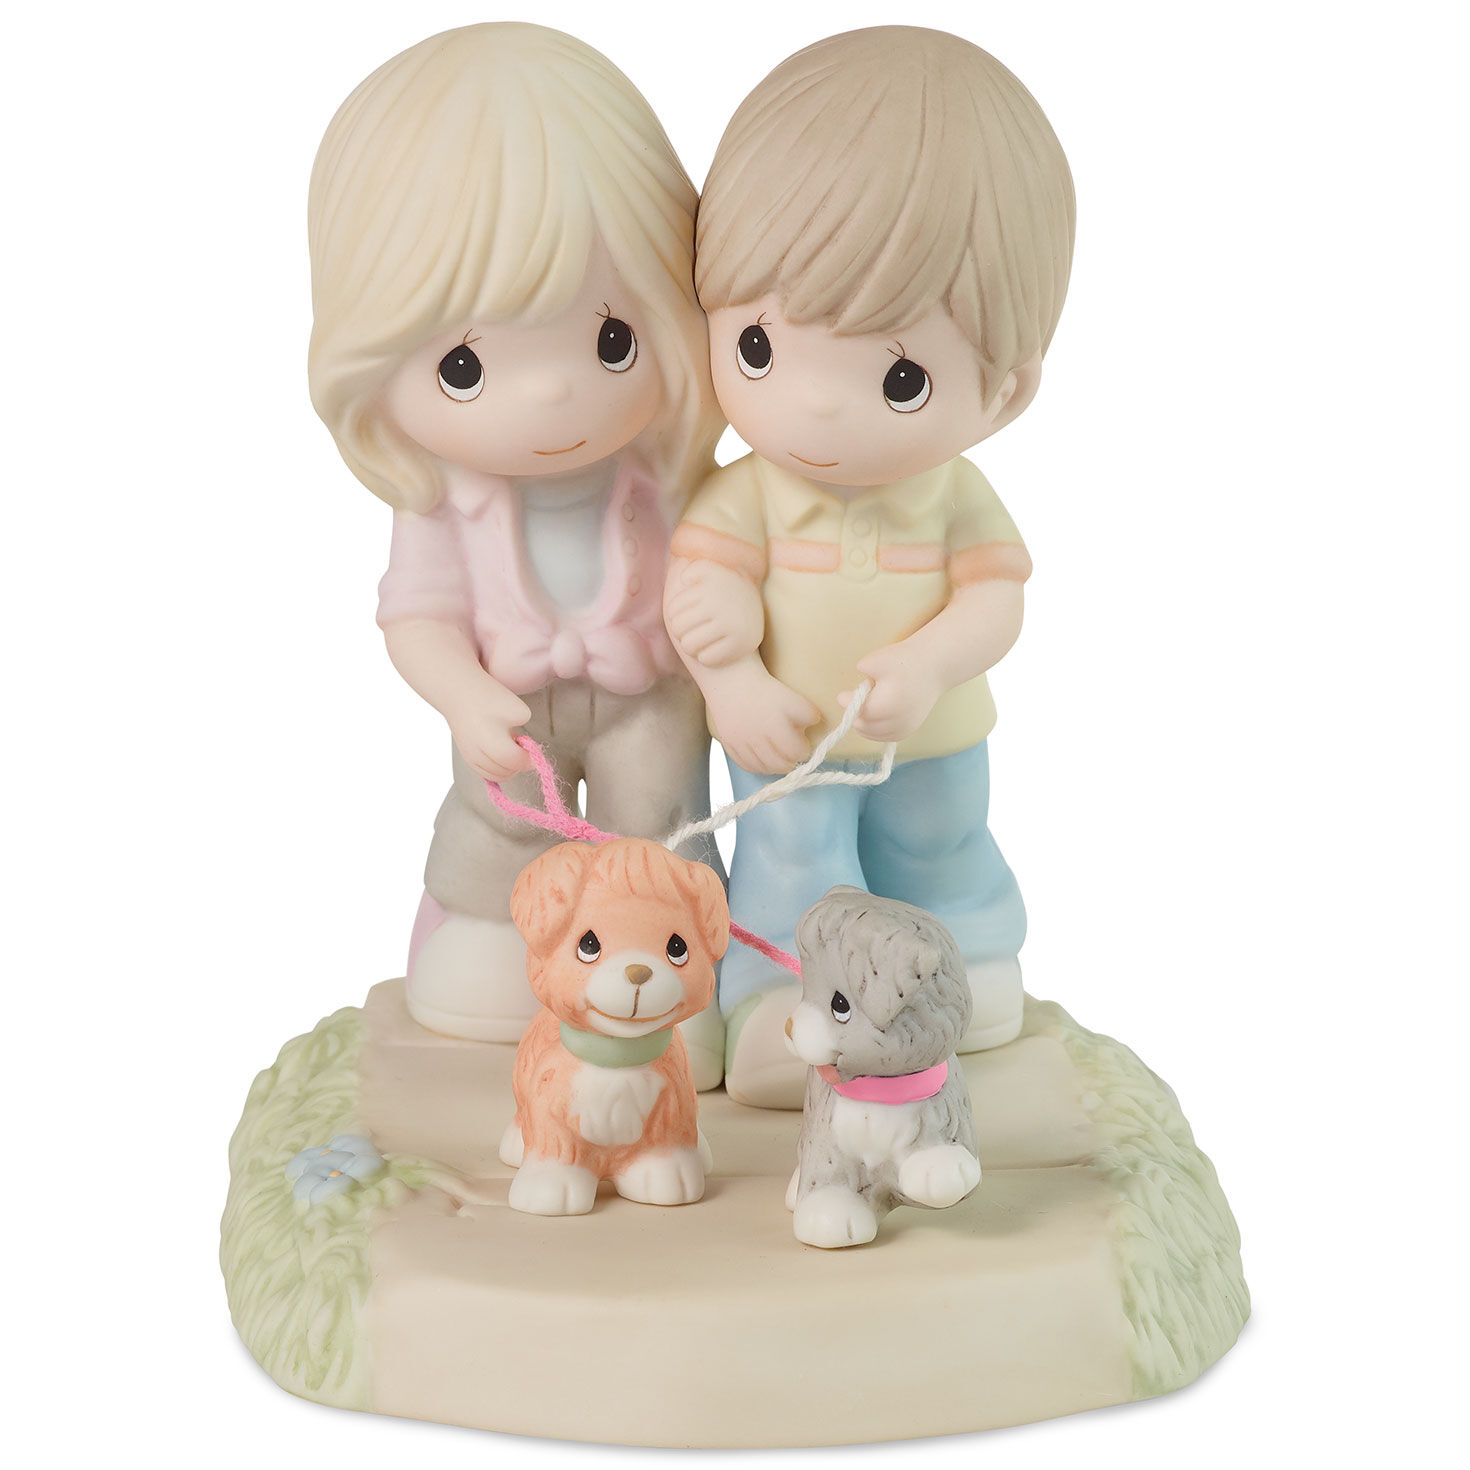 Precious Moments I’ll Never Let You Go Figurine, 5.4" for only USD 90.00 | Hallmark